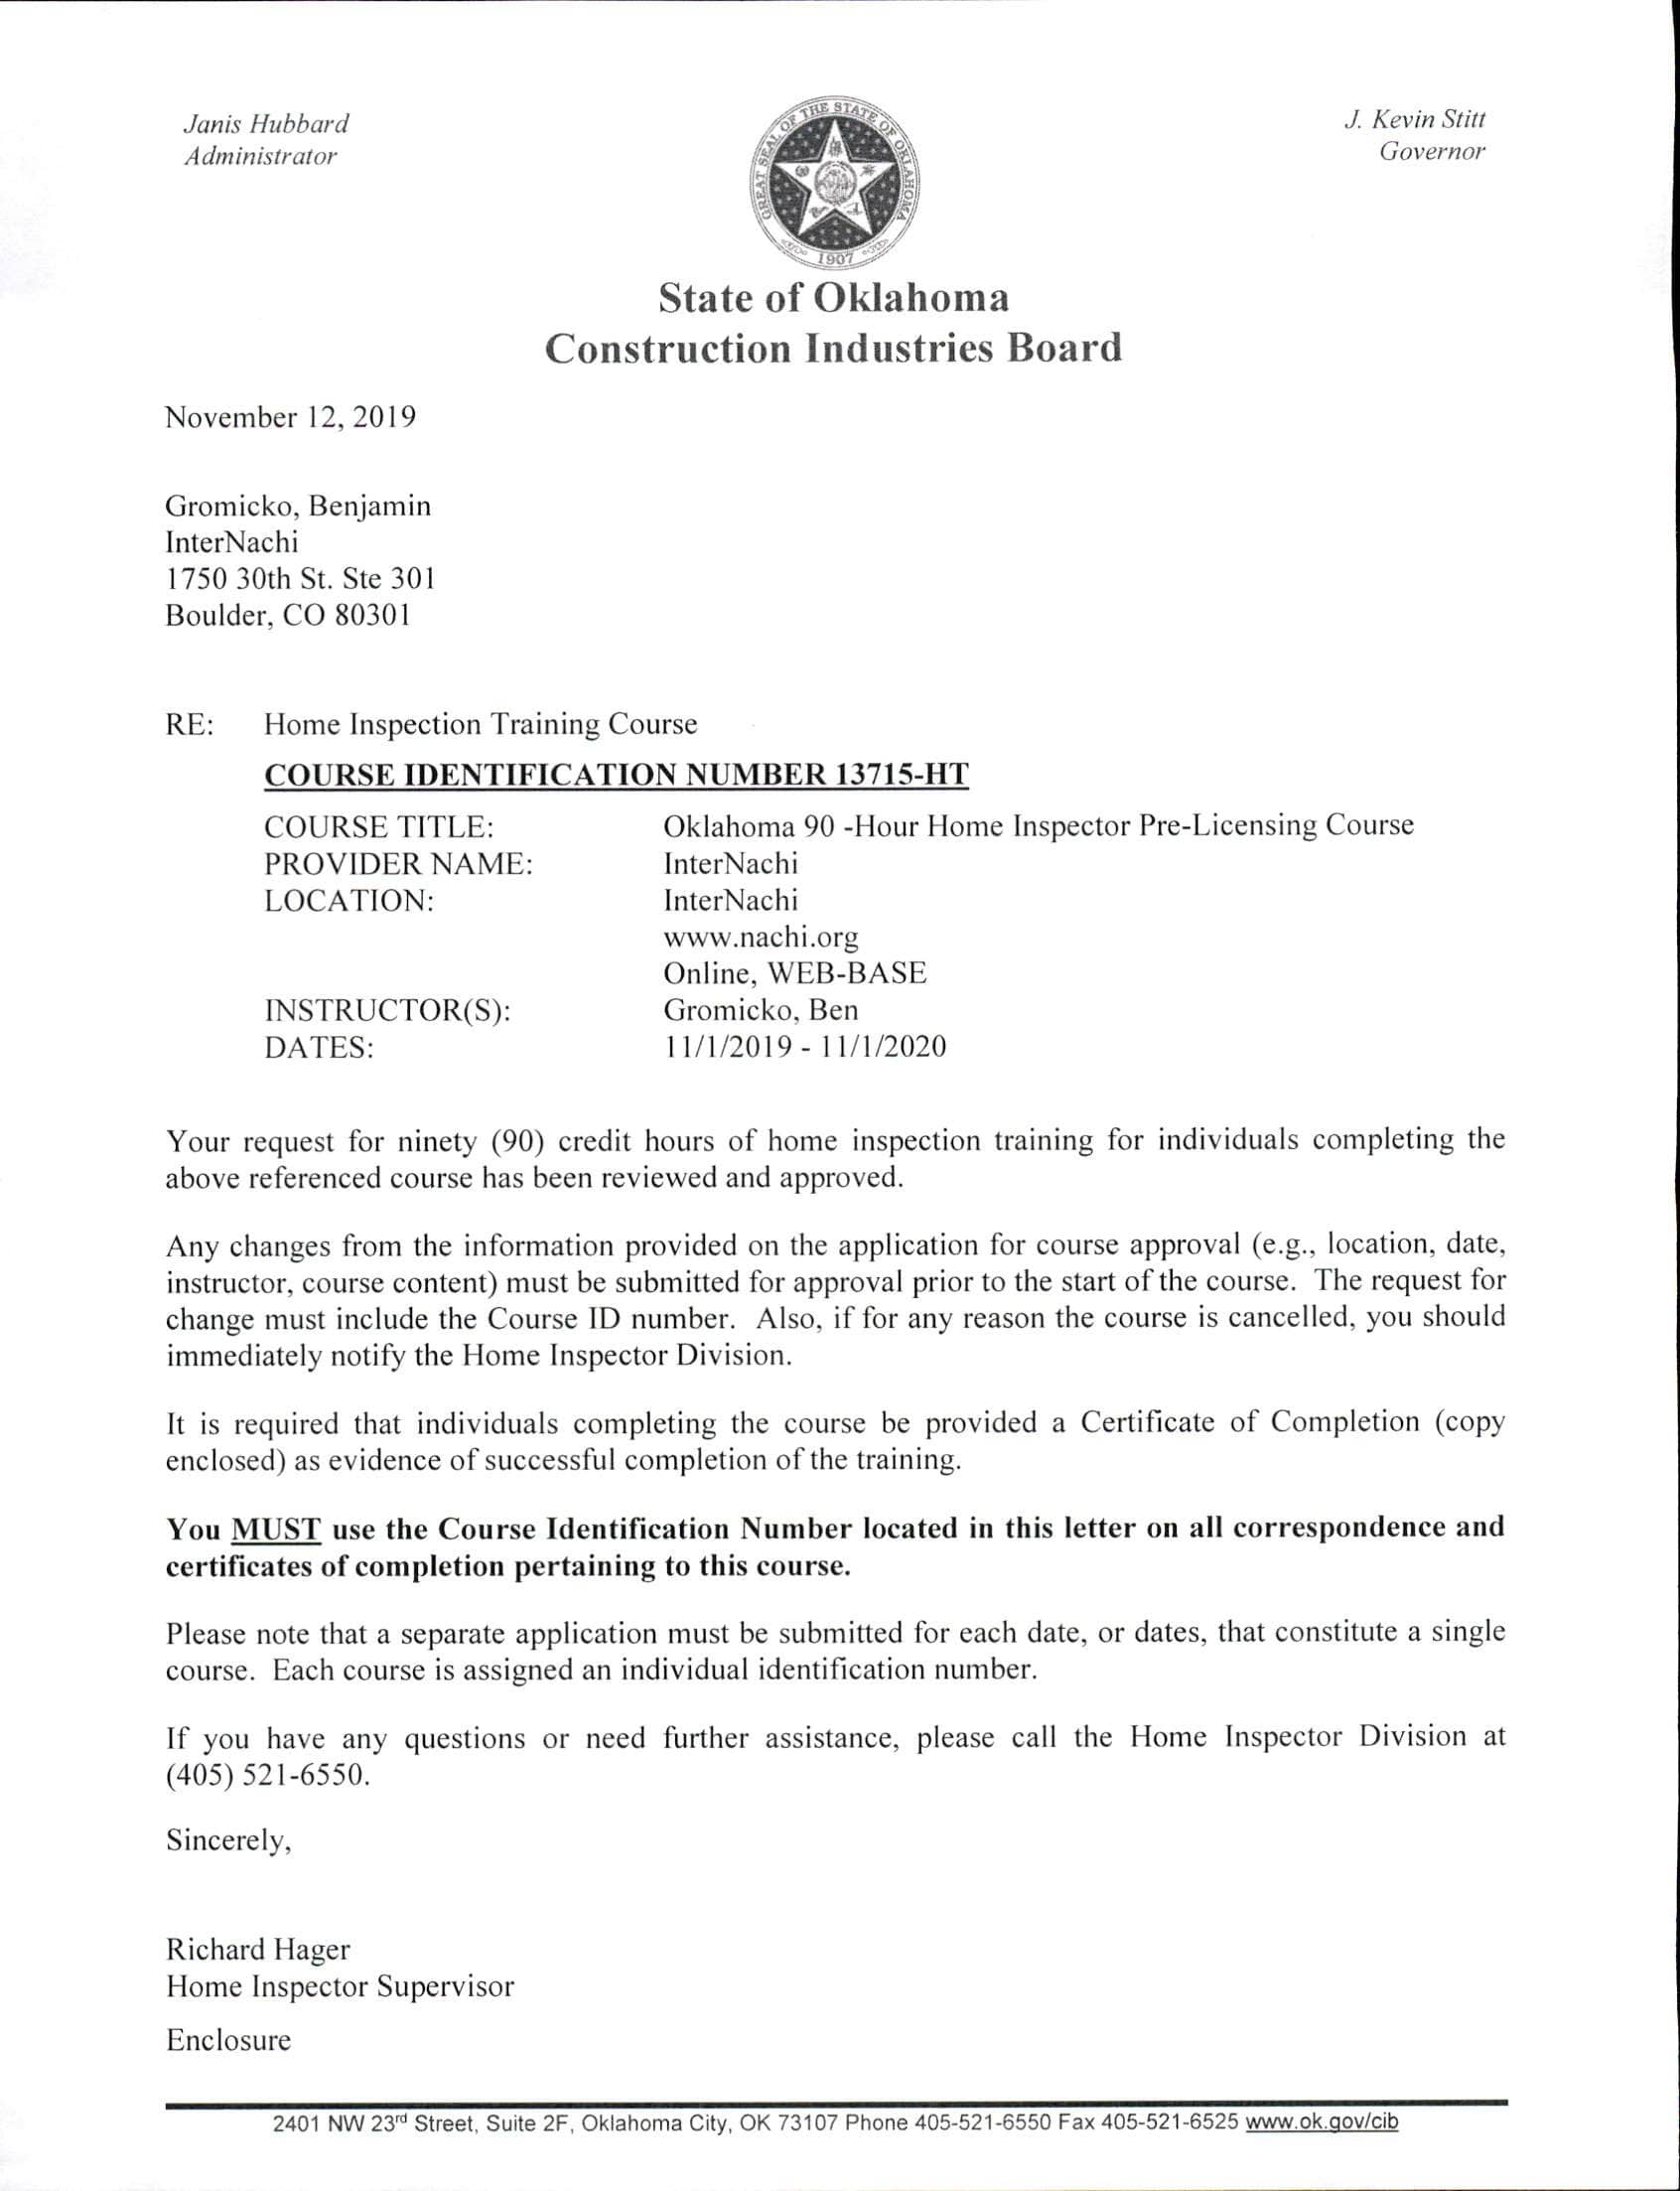 Image of Construction Industries Board | State of Oklahoma